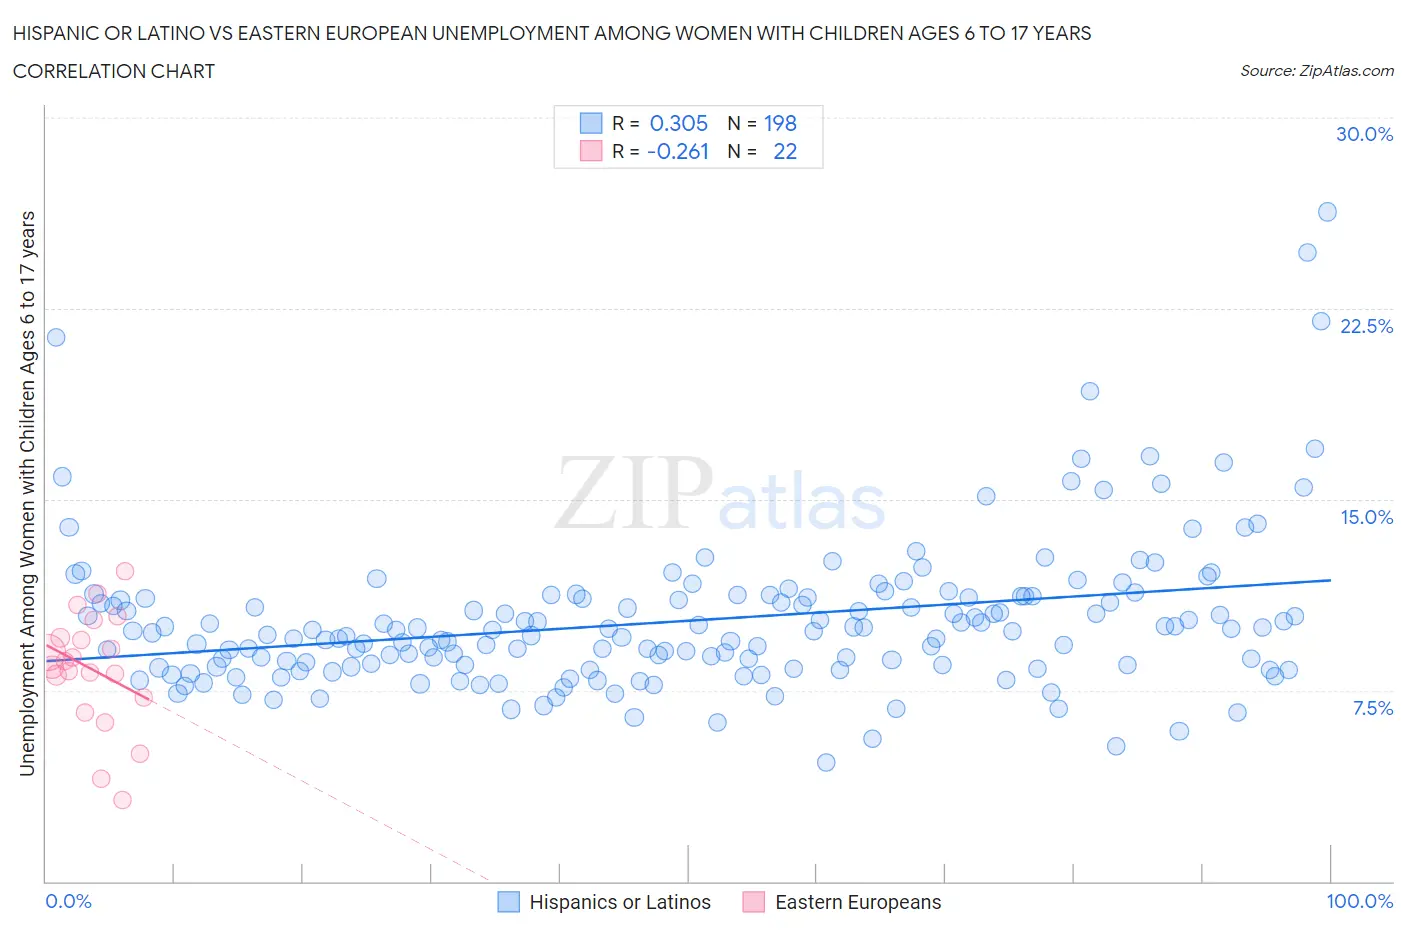 Hispanic or Latino vs Eastern European Unemployment Among Women with Children Ages 6 to 17 years